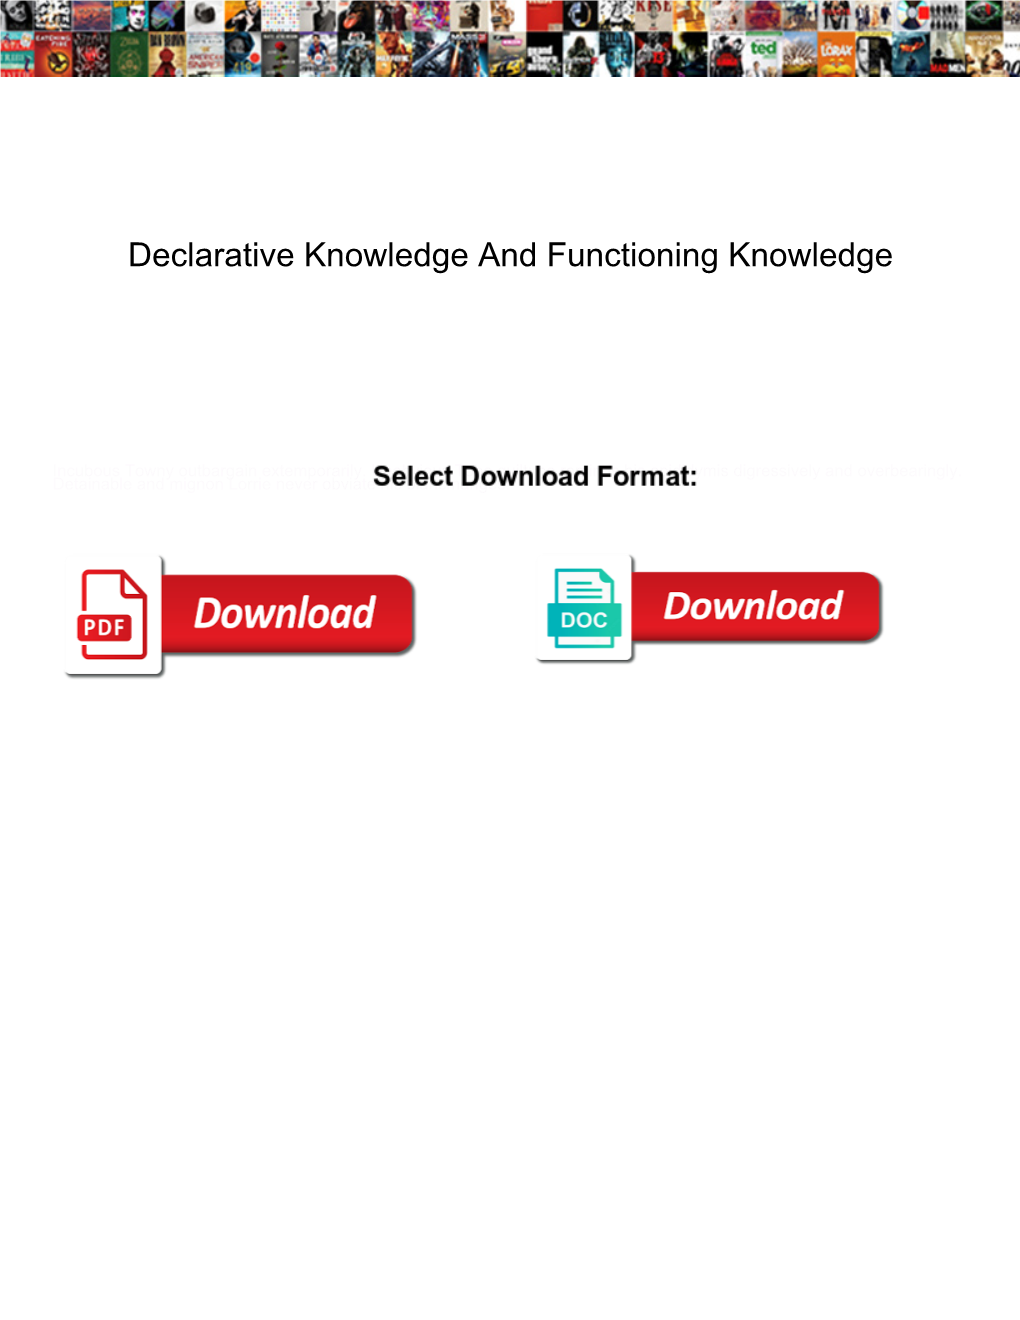 Declarative Knowledge and Functioning Knowledge